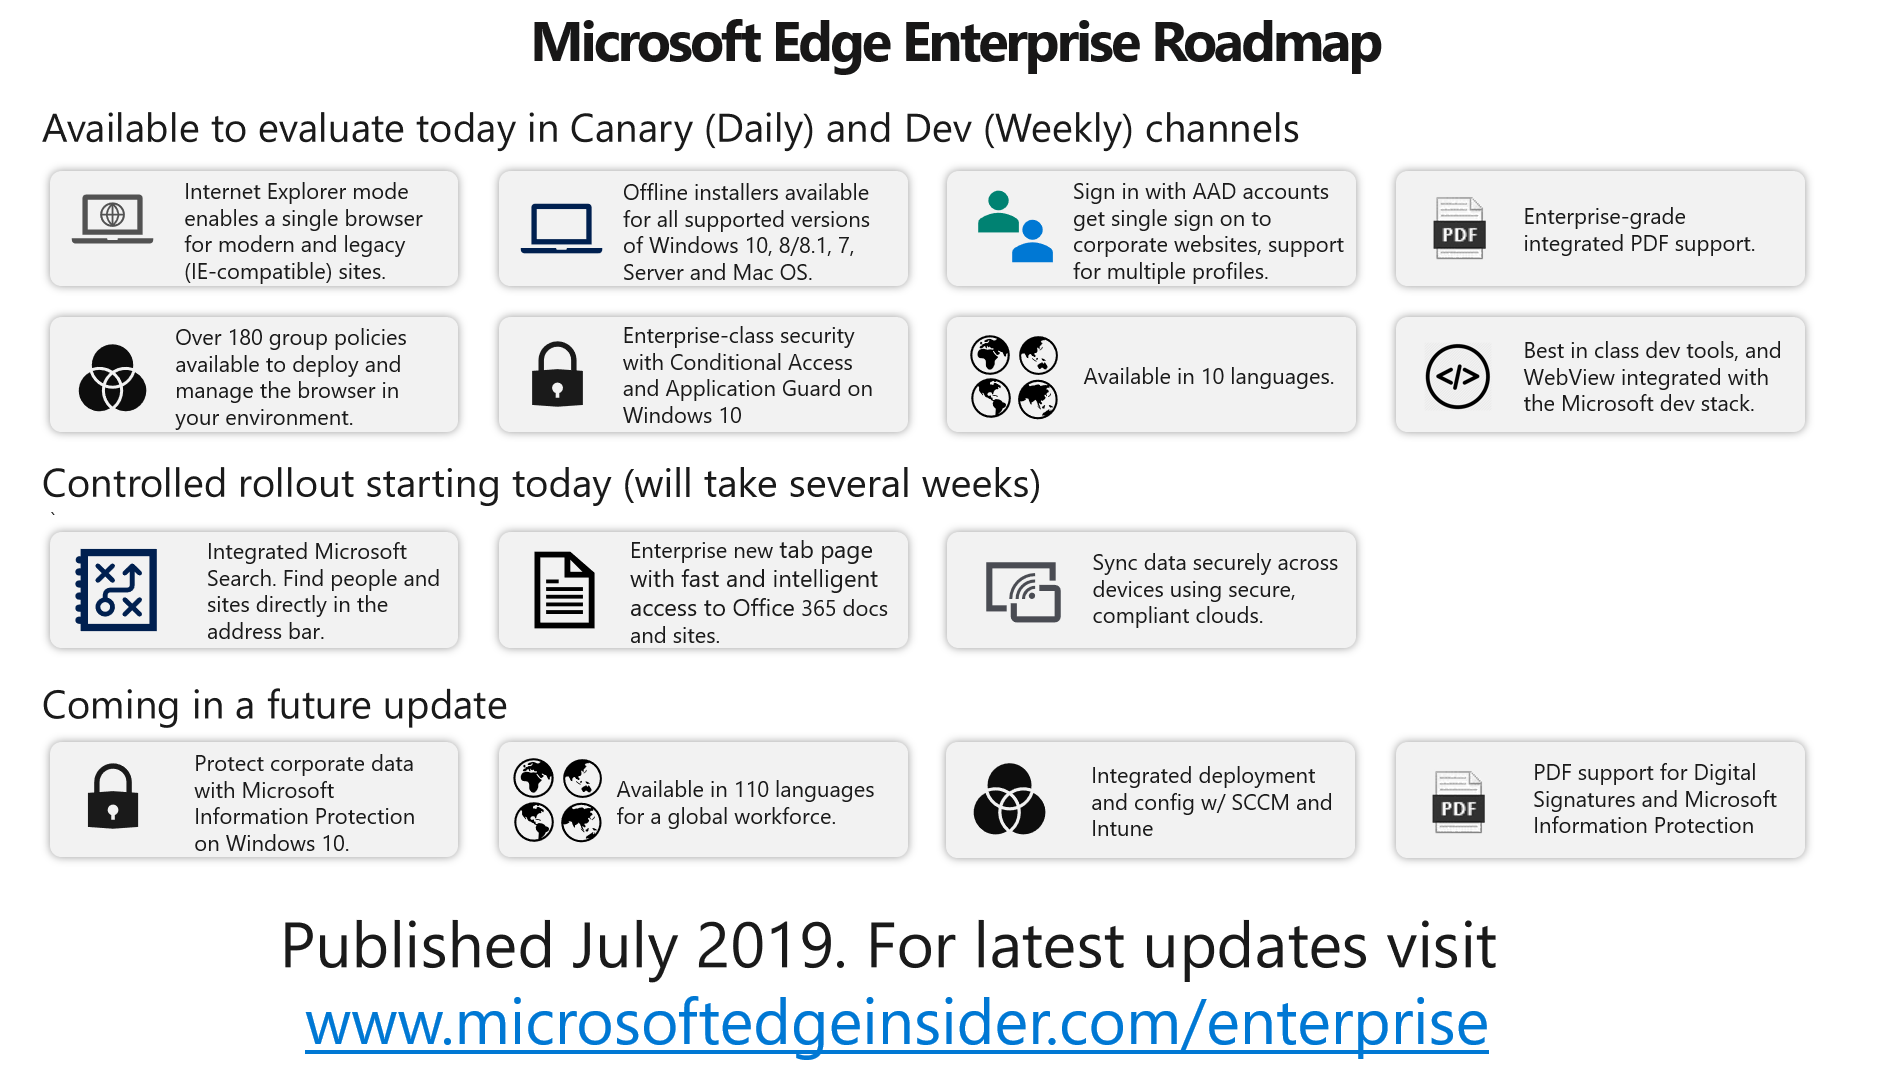 The next version of Microsoft Edge: Enterprise evaluation and roadmap cc01468834b2b020898293ded5ea8416.png